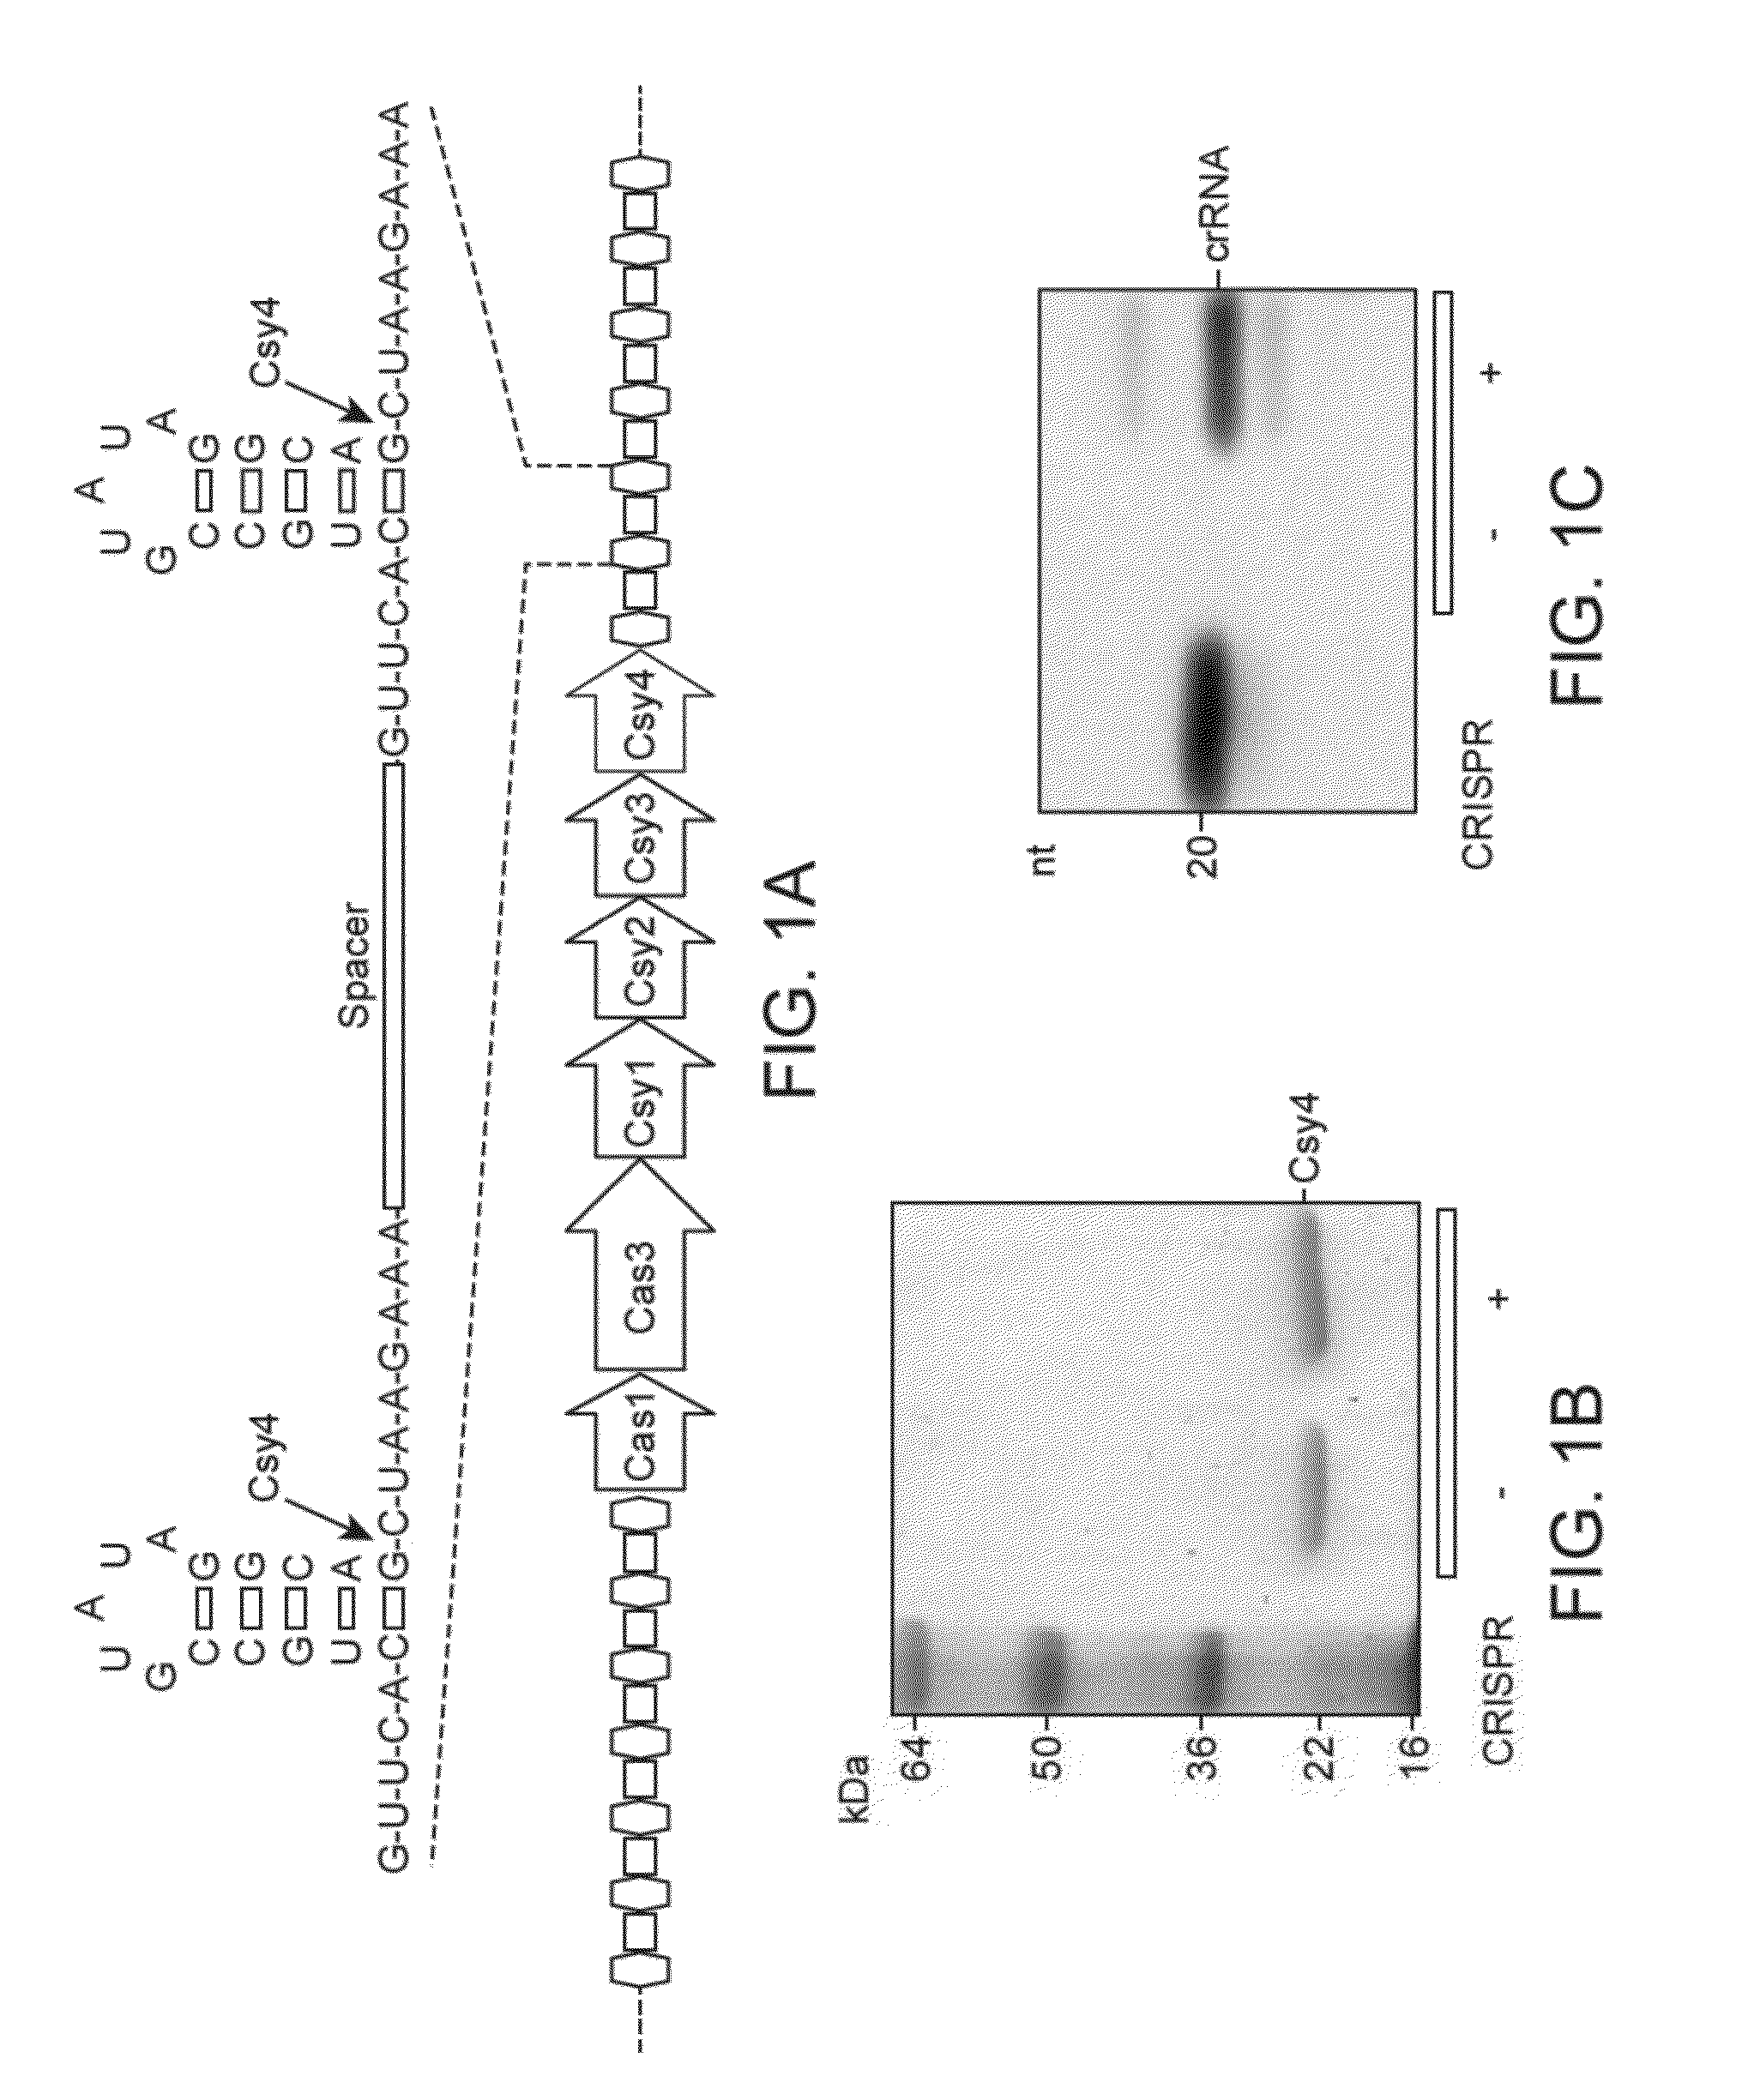 Endoribonuclease compositions and methods of use thereof